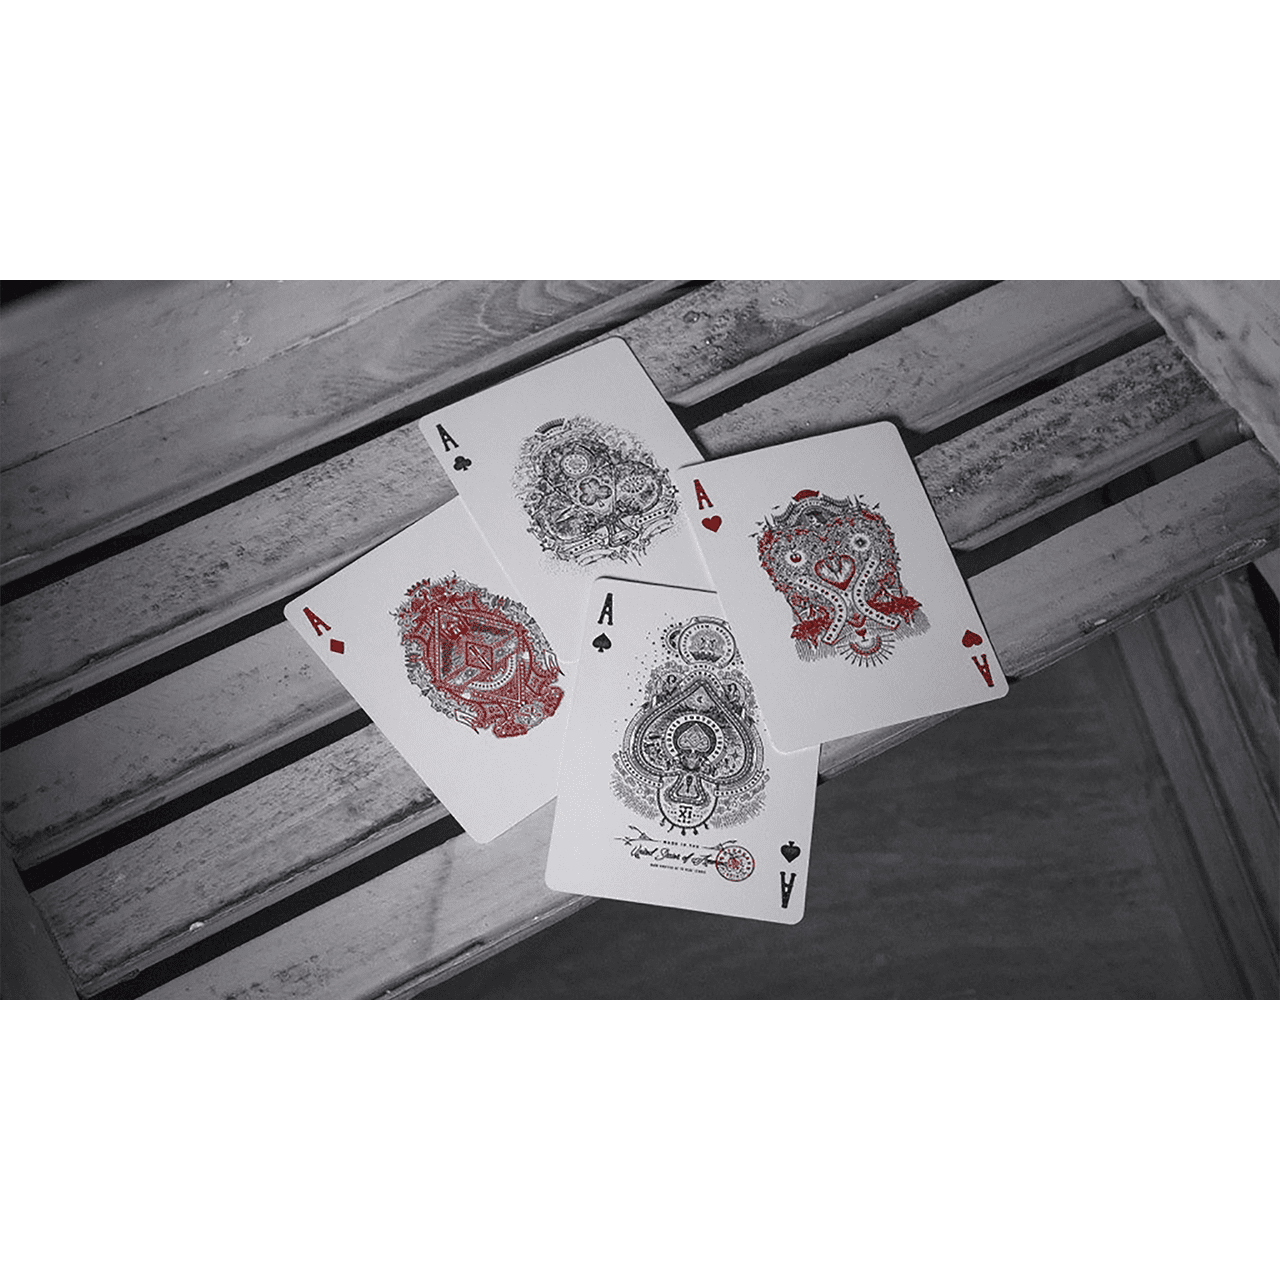 Contraband Playing Cards by theory11